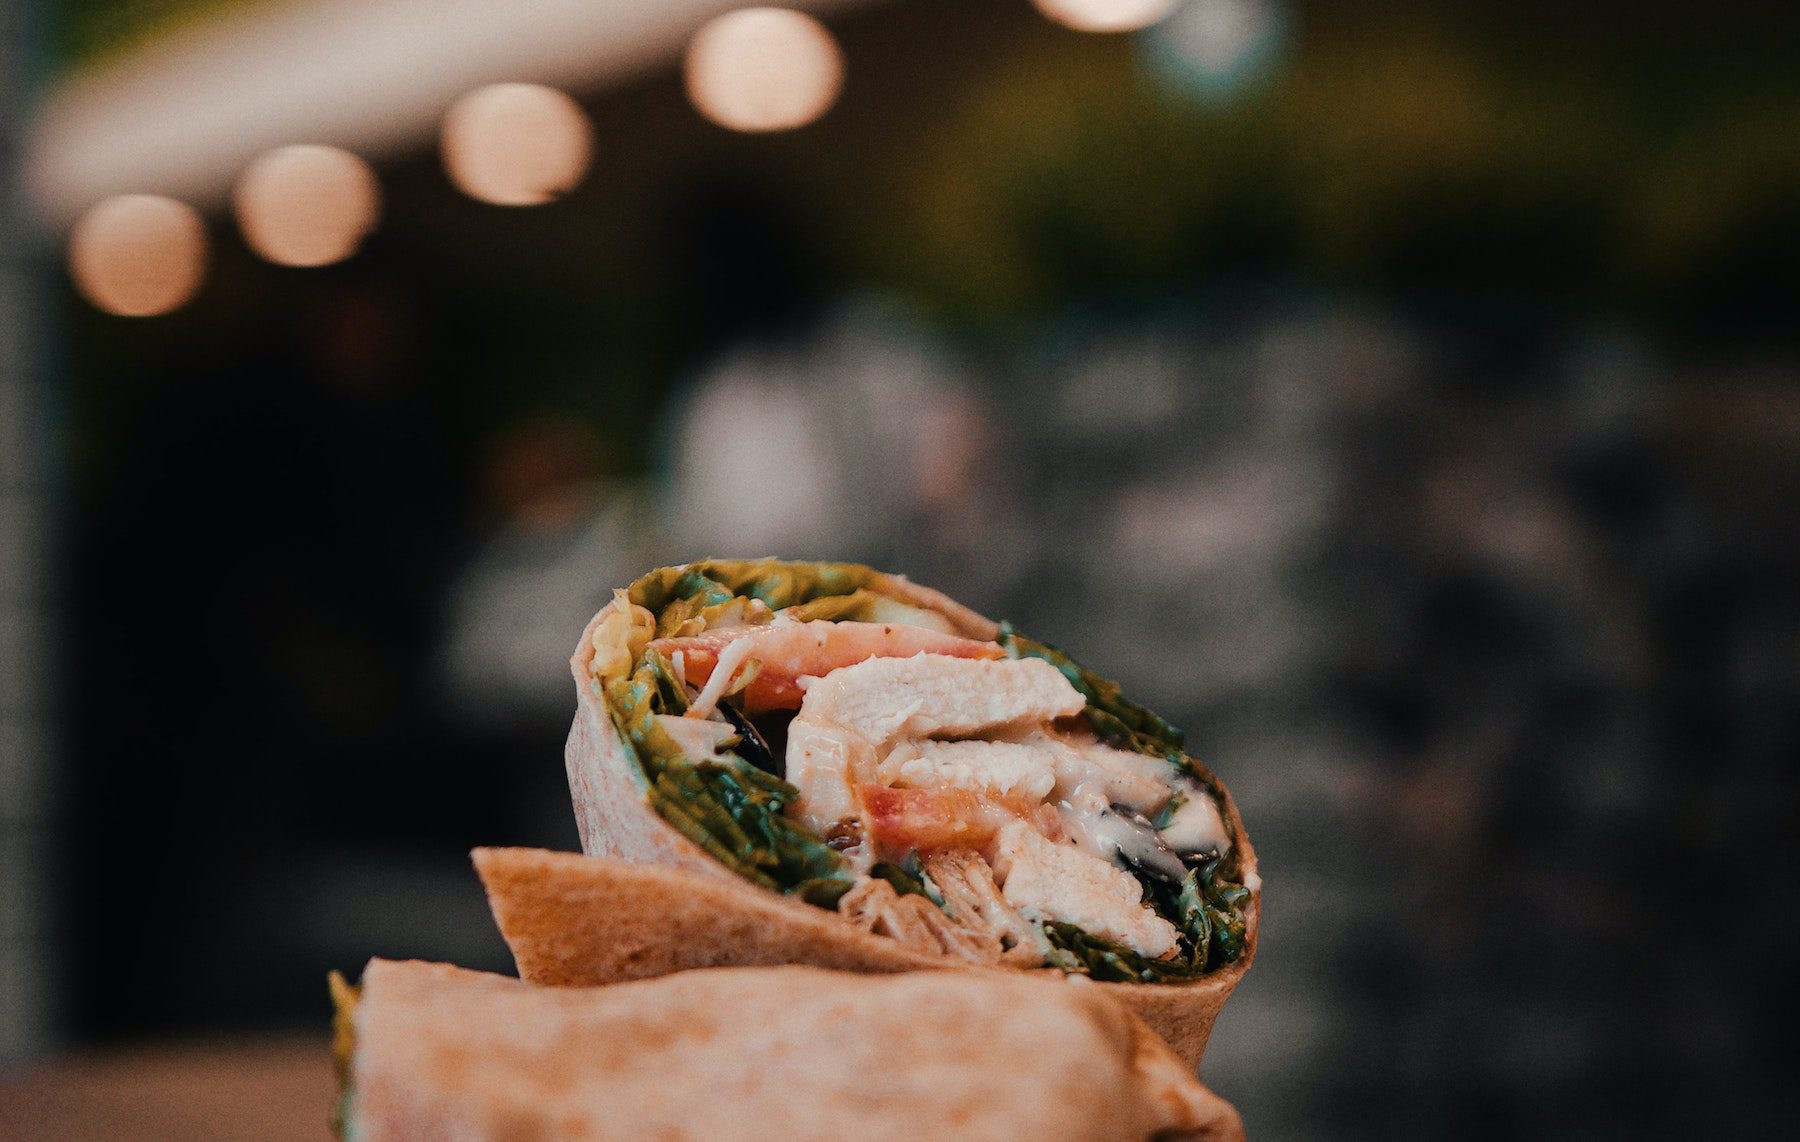 A burrito cut in half and stacked with a blurred bokeh background.